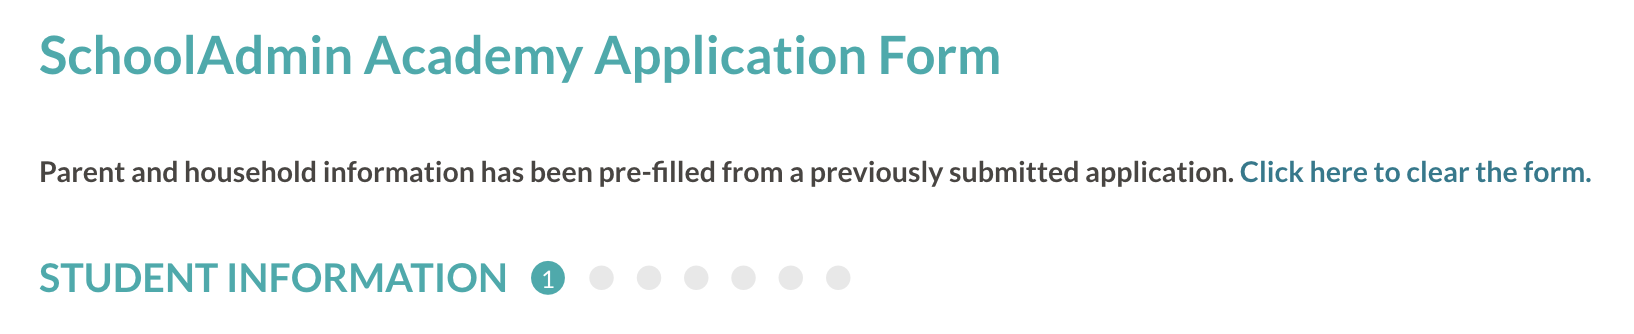 Application Form with message about pre-filled parent and household information, plus the option to clear the form.